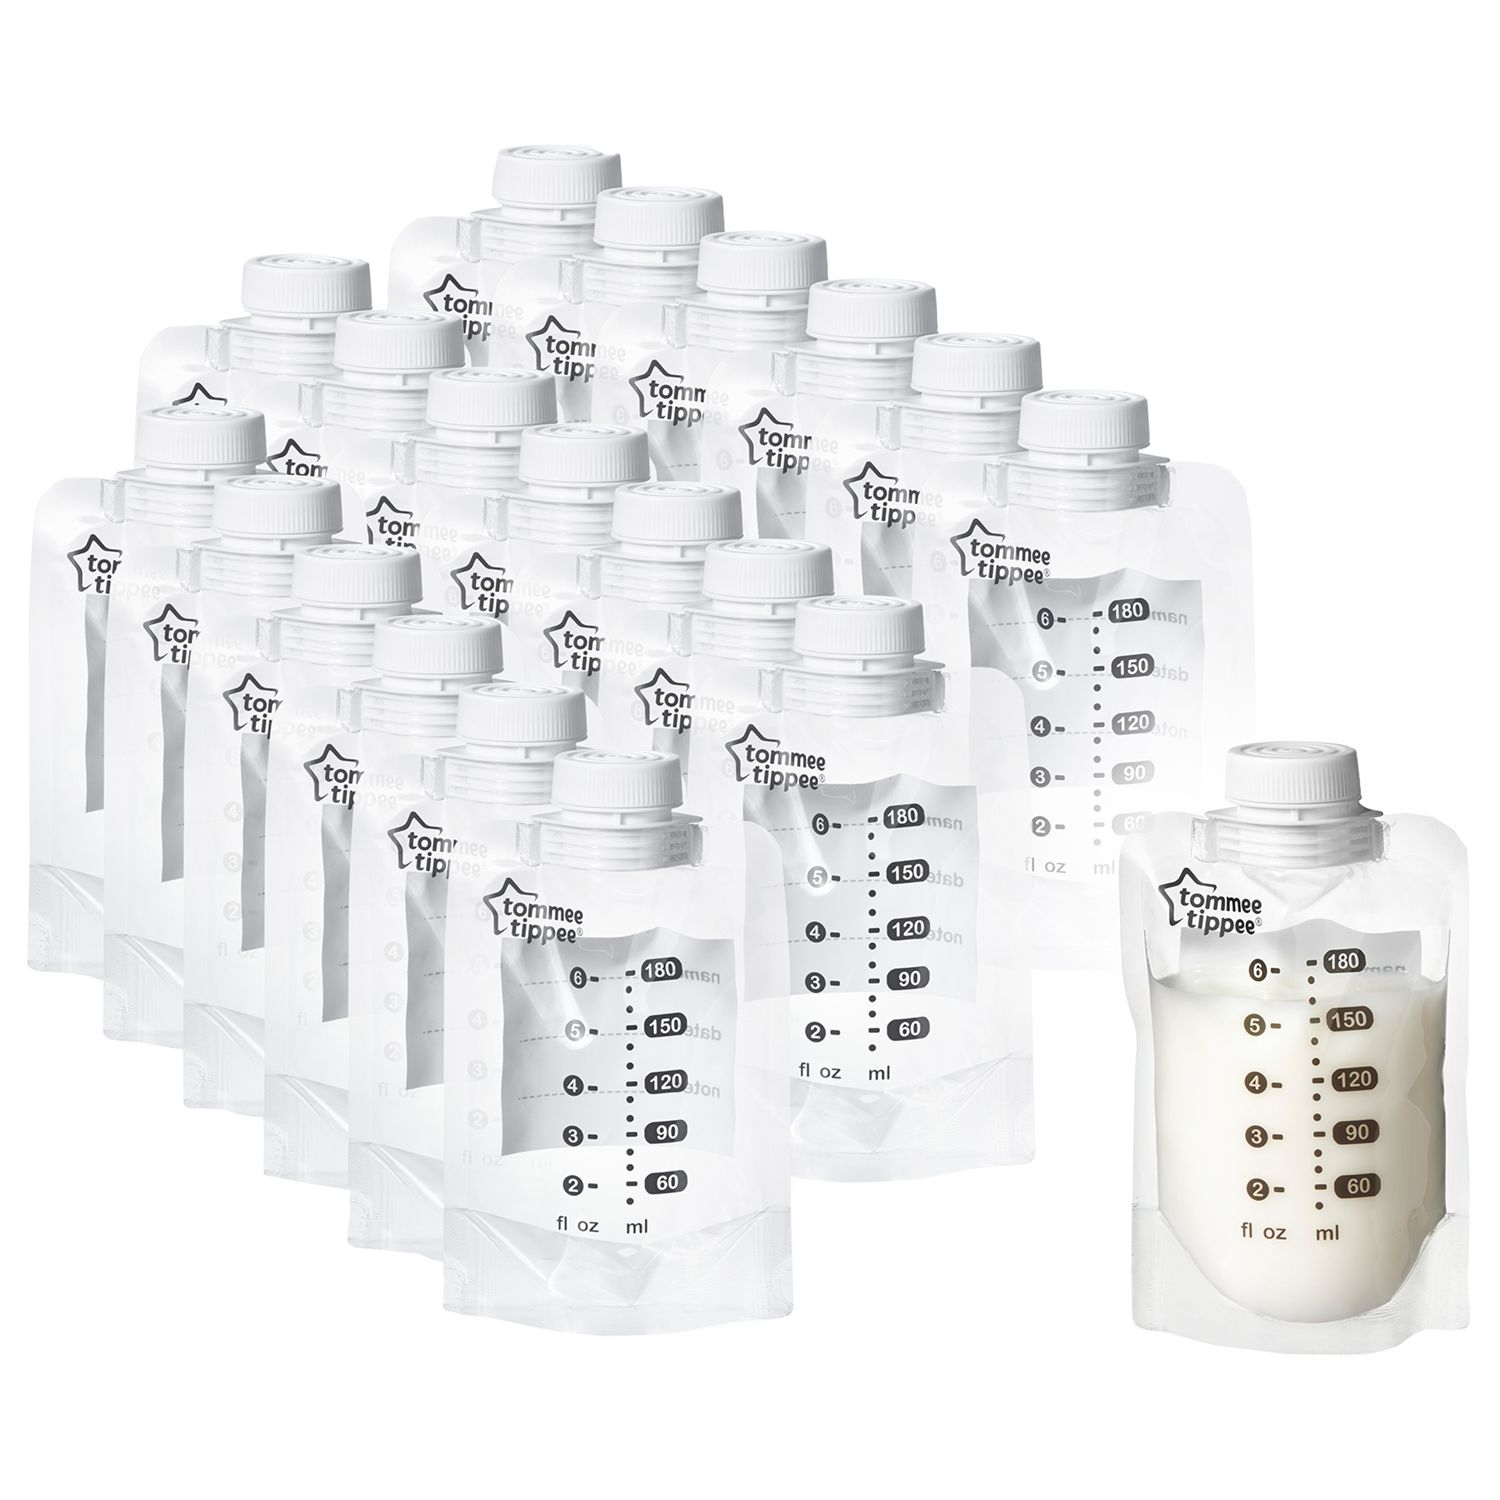 tommee tippee express and go electric breast pump starter set